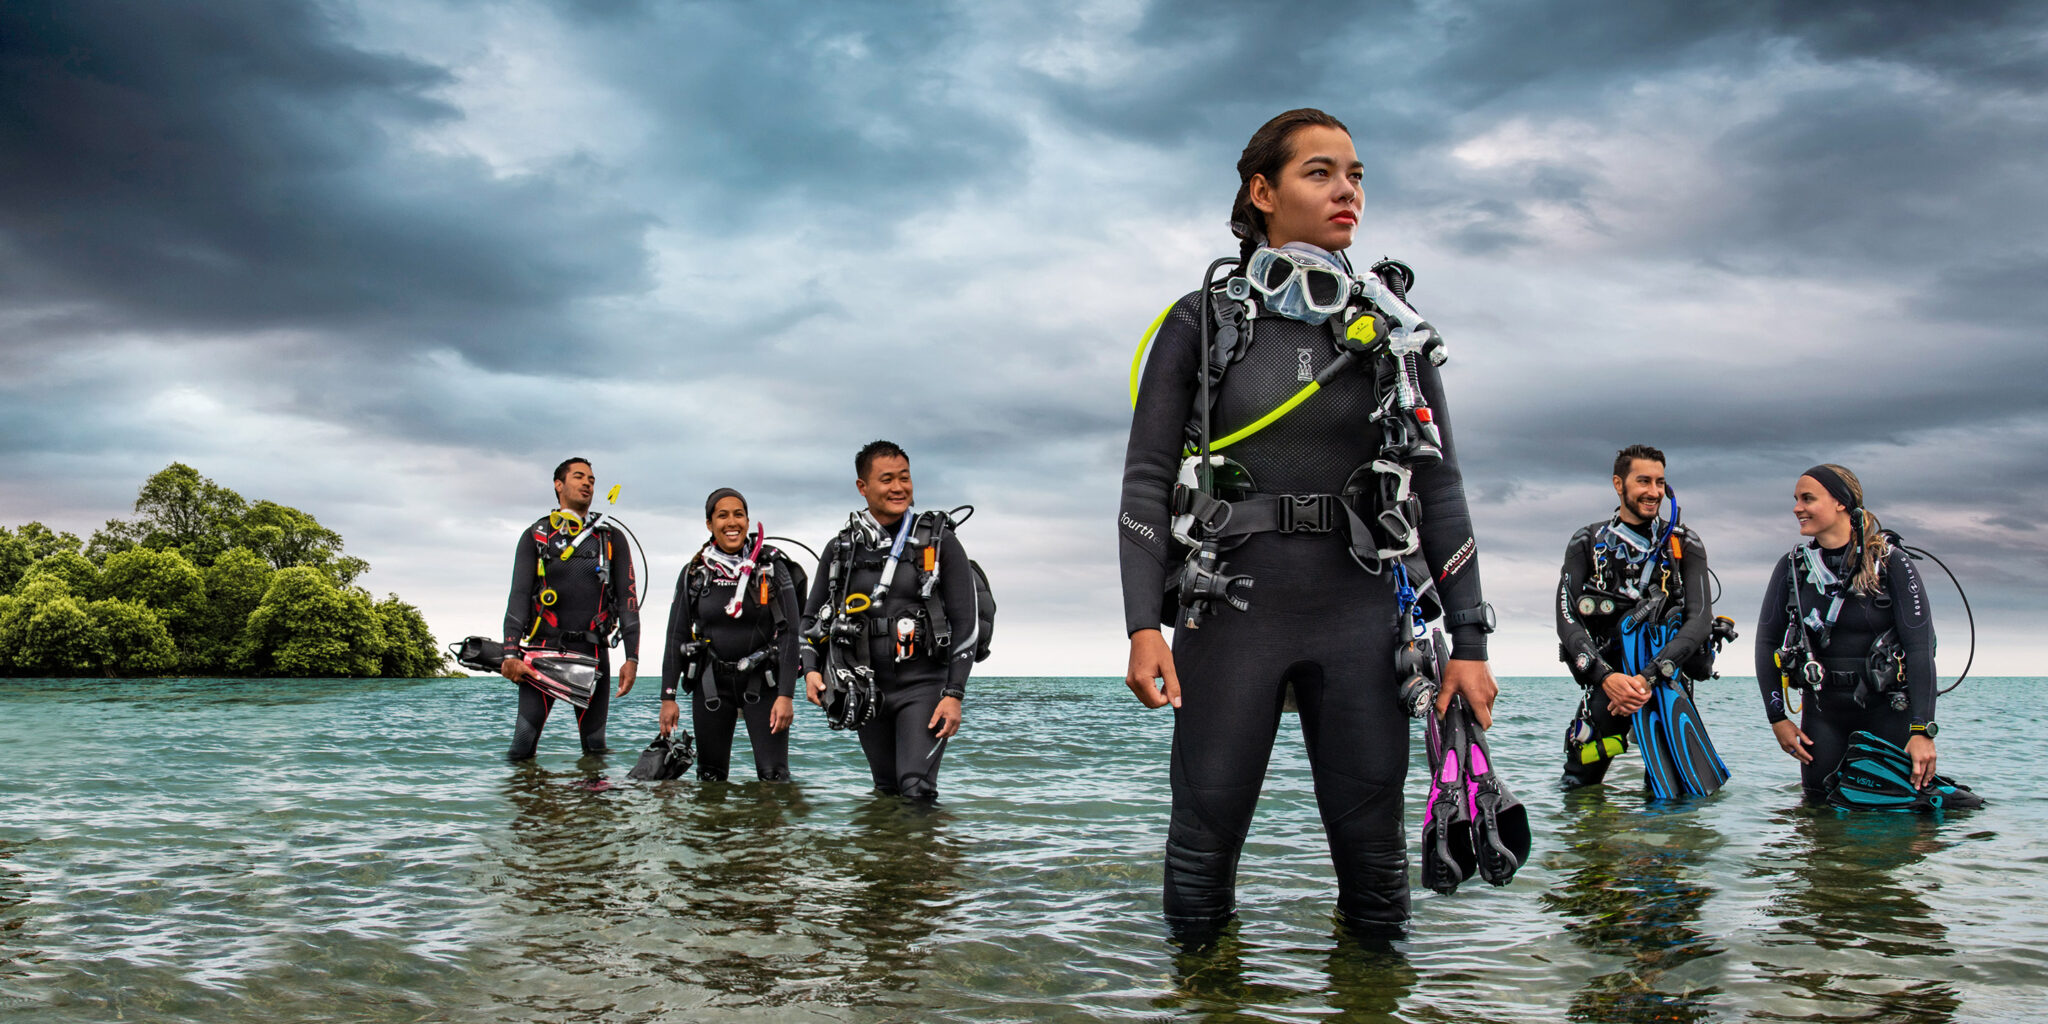 A Professional diver standing in shallow water with three scuba students behind as they exit from a shore dive at the beach